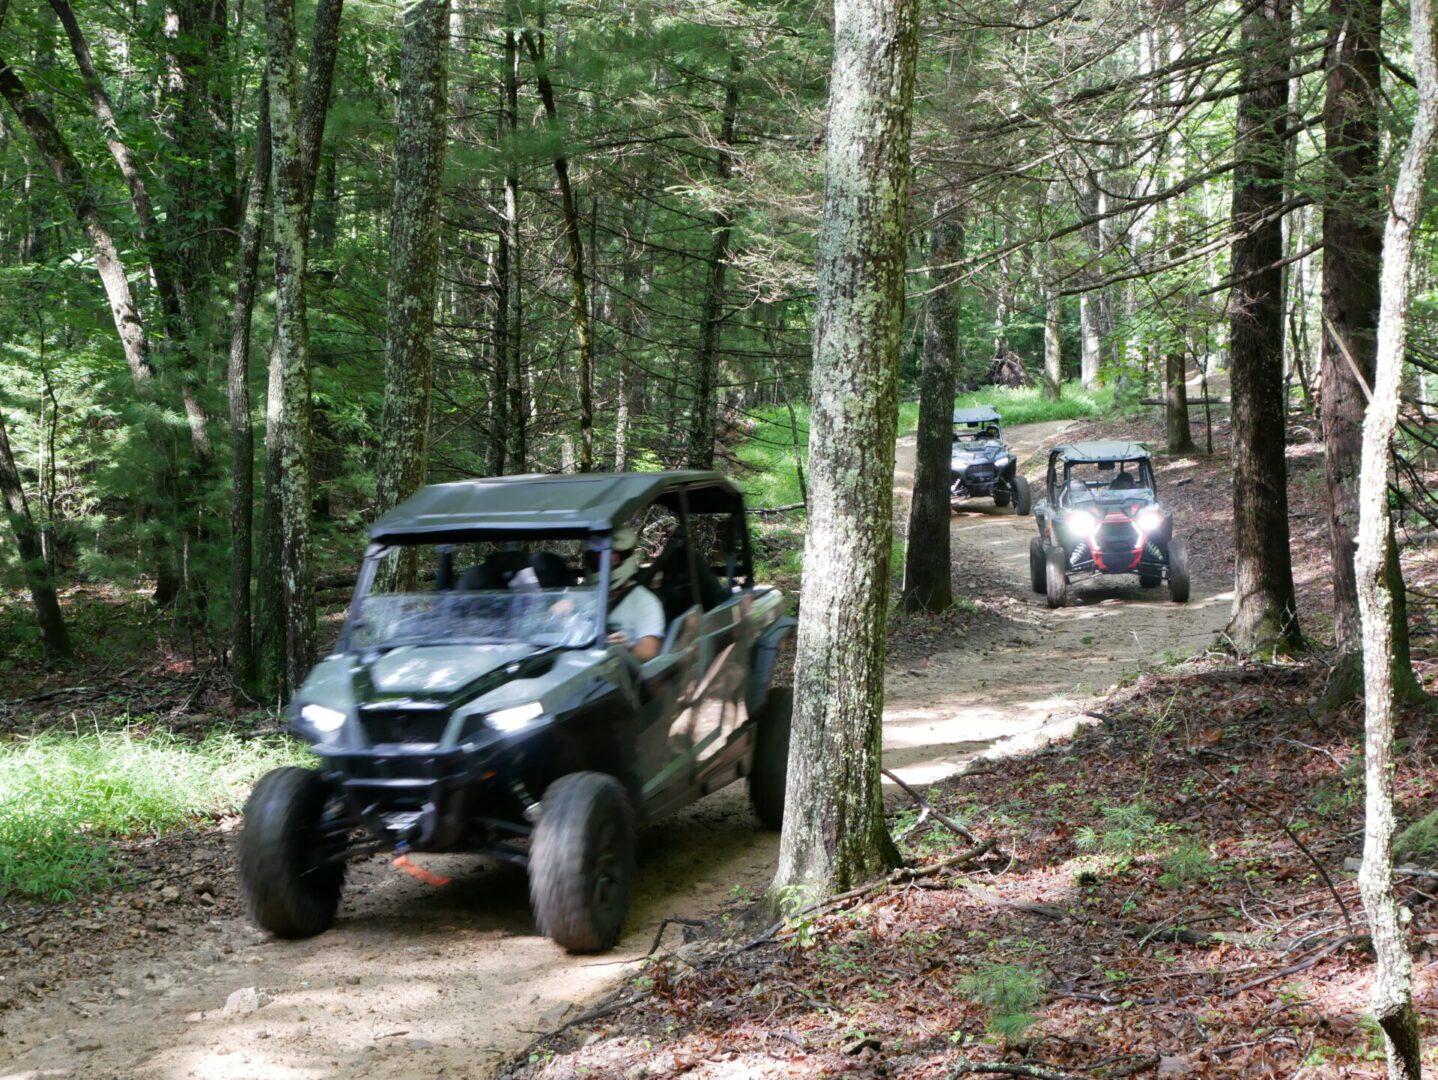 A group of people riding off road vehicles on a trail.